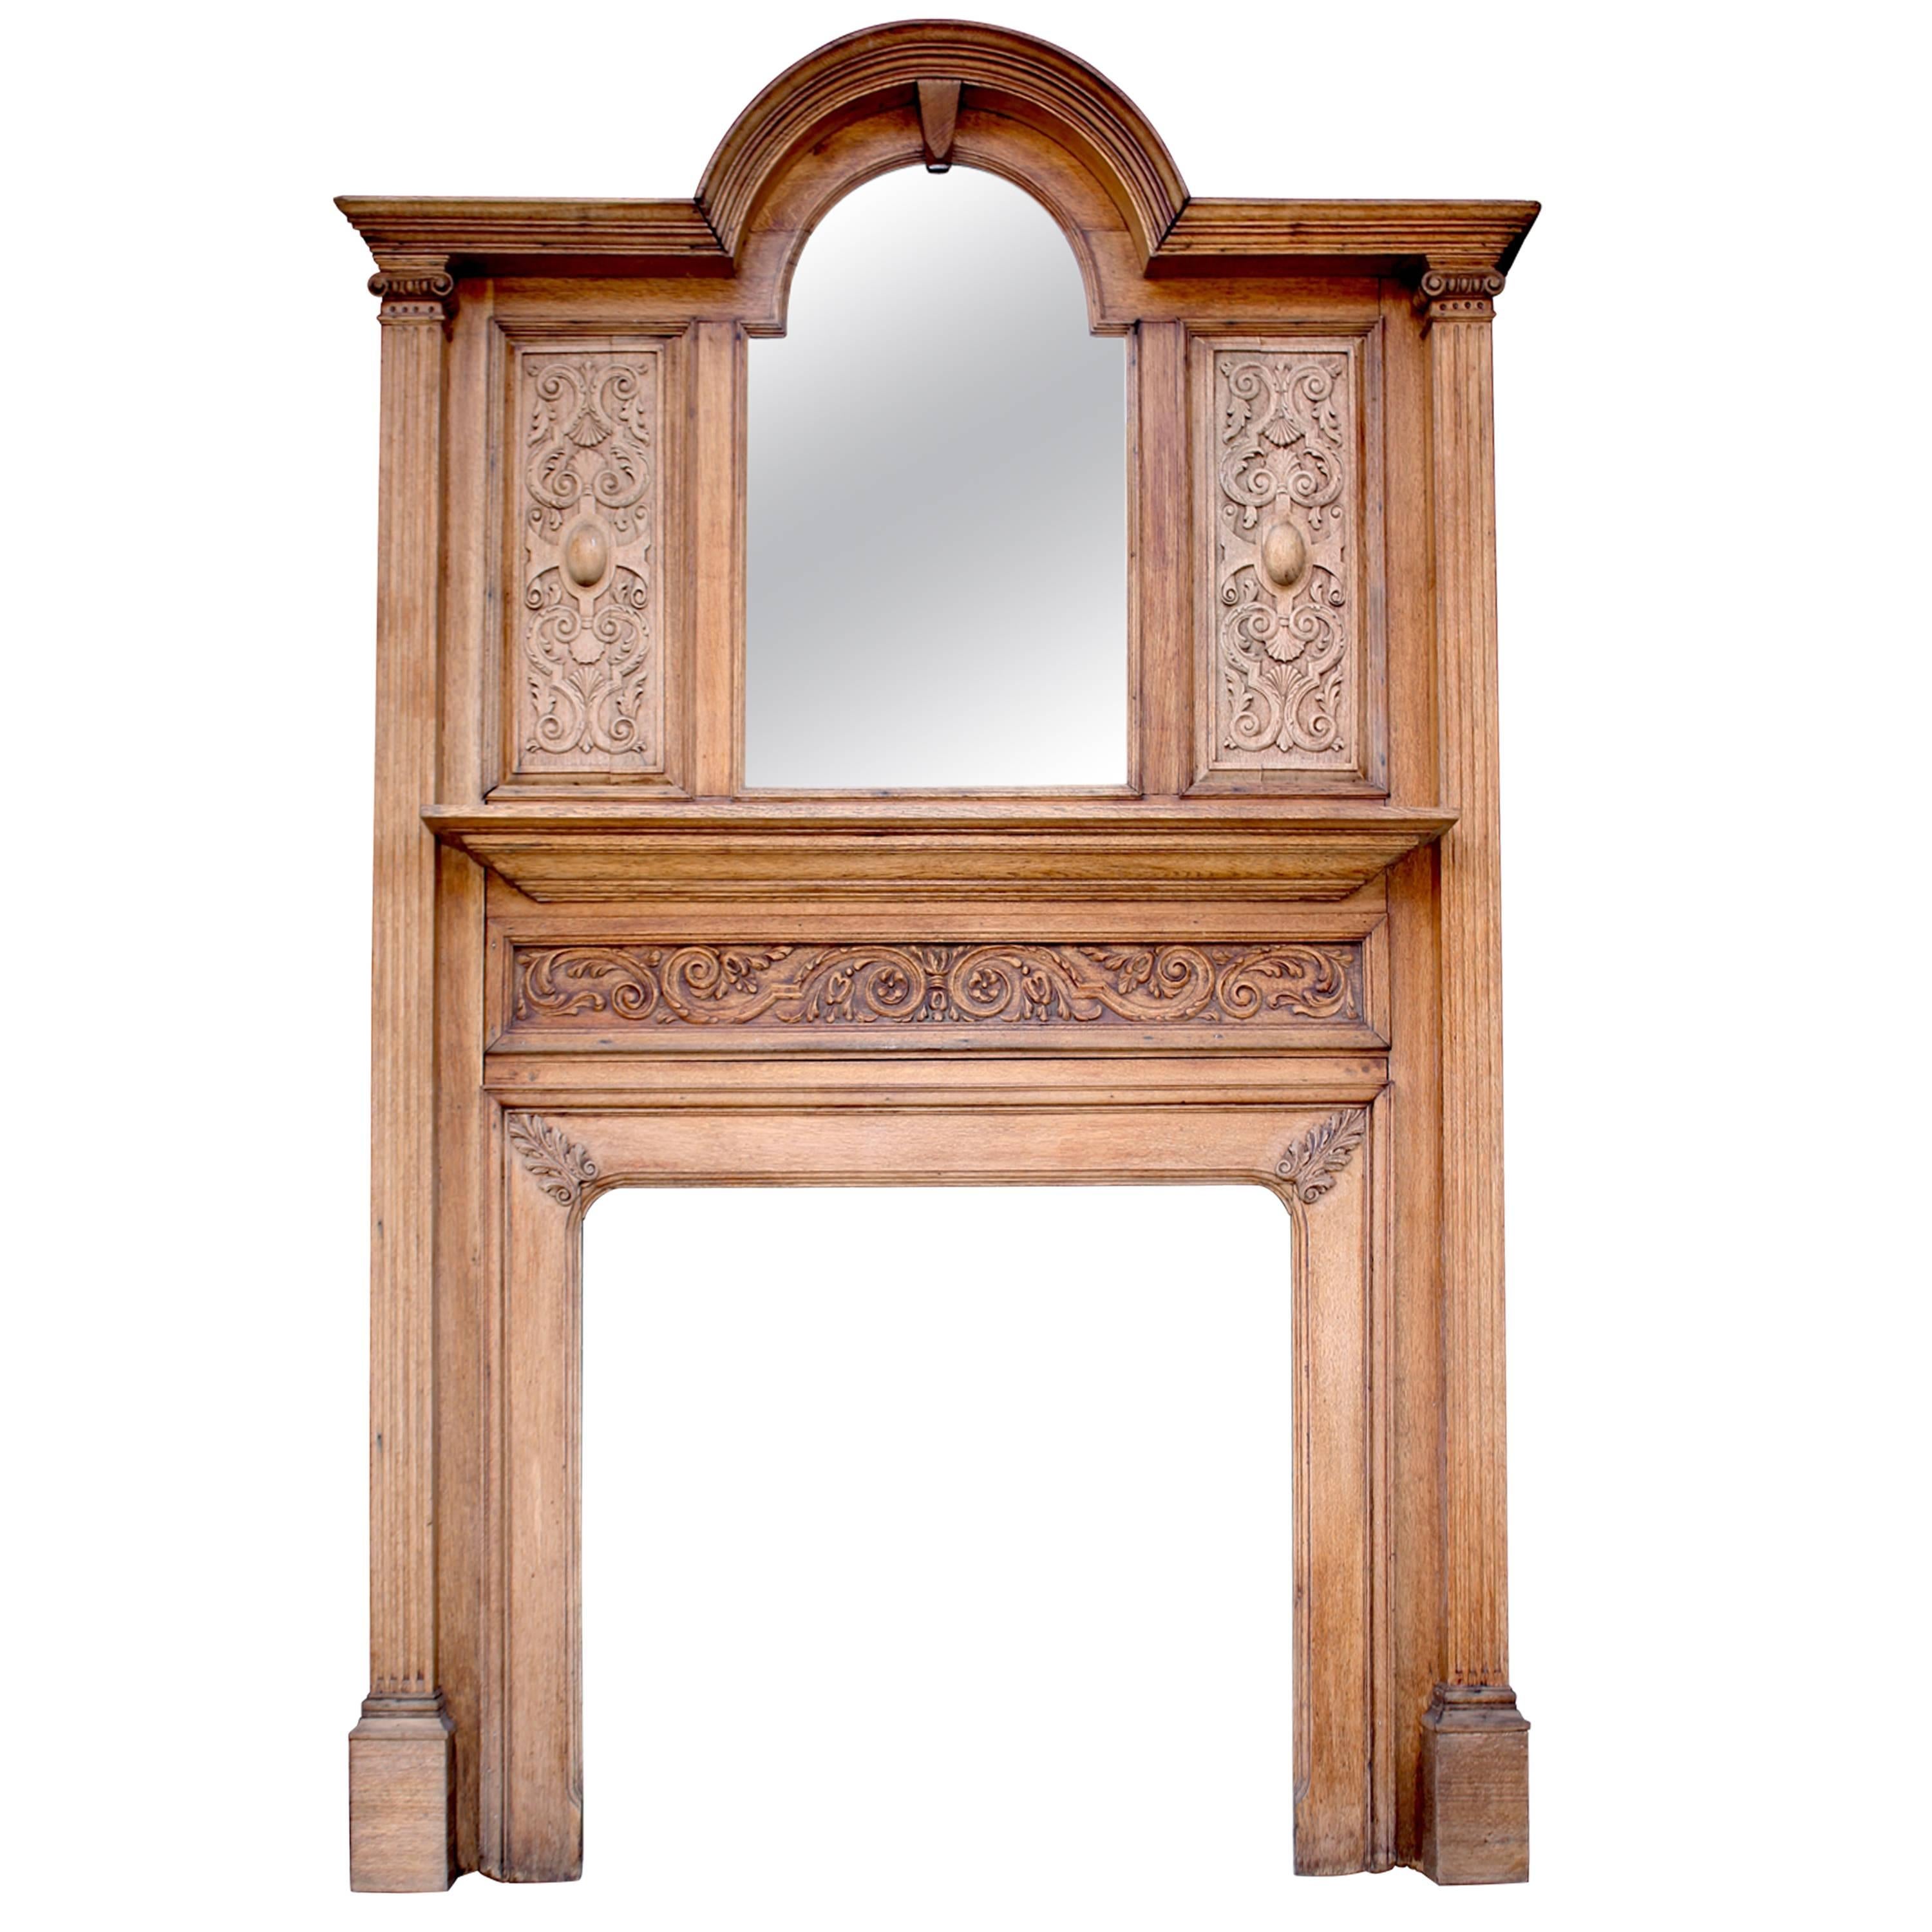 Antique Carved Oak Fire Surround with Bevelled Mirror, circa 1900